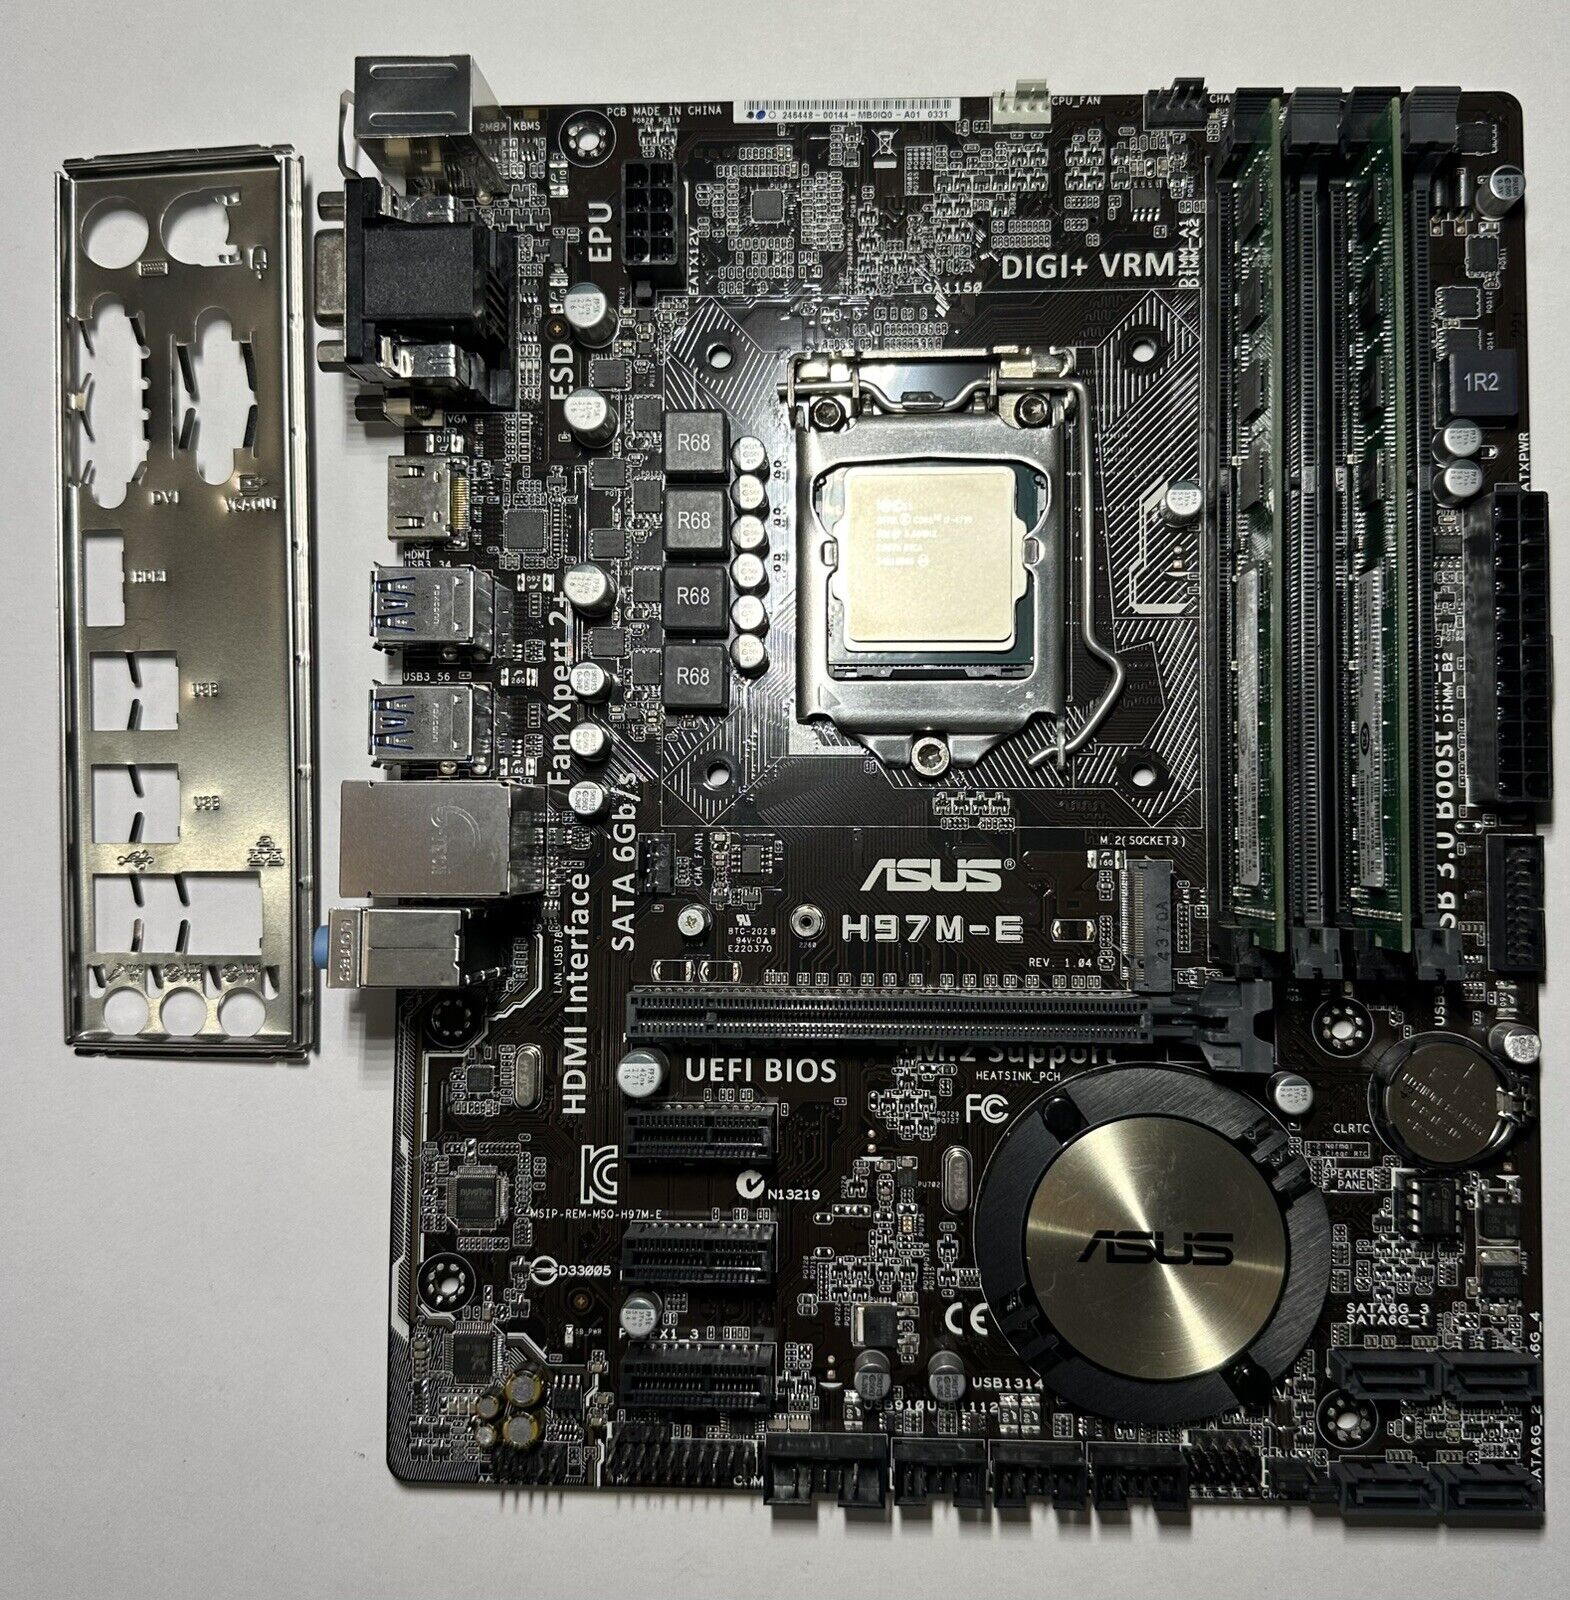 ASUS H97M-E Motherboard, Core i7-4790 3.6GHz, 2x4 GB Crucial Ram